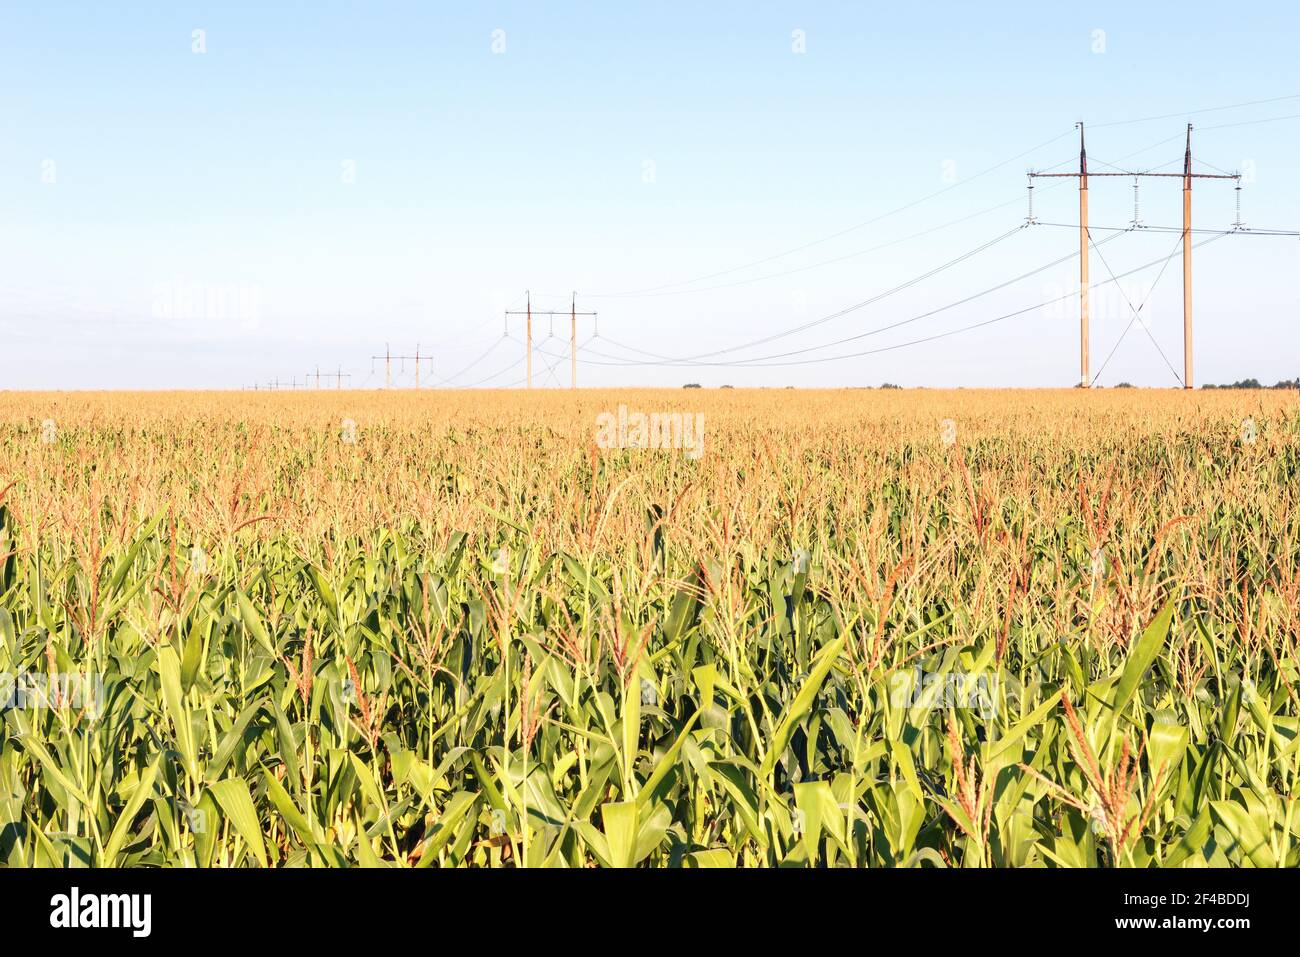 Close-up of silage corn leaf tops against blue sky. A power line is laid across the field. Stock Photo